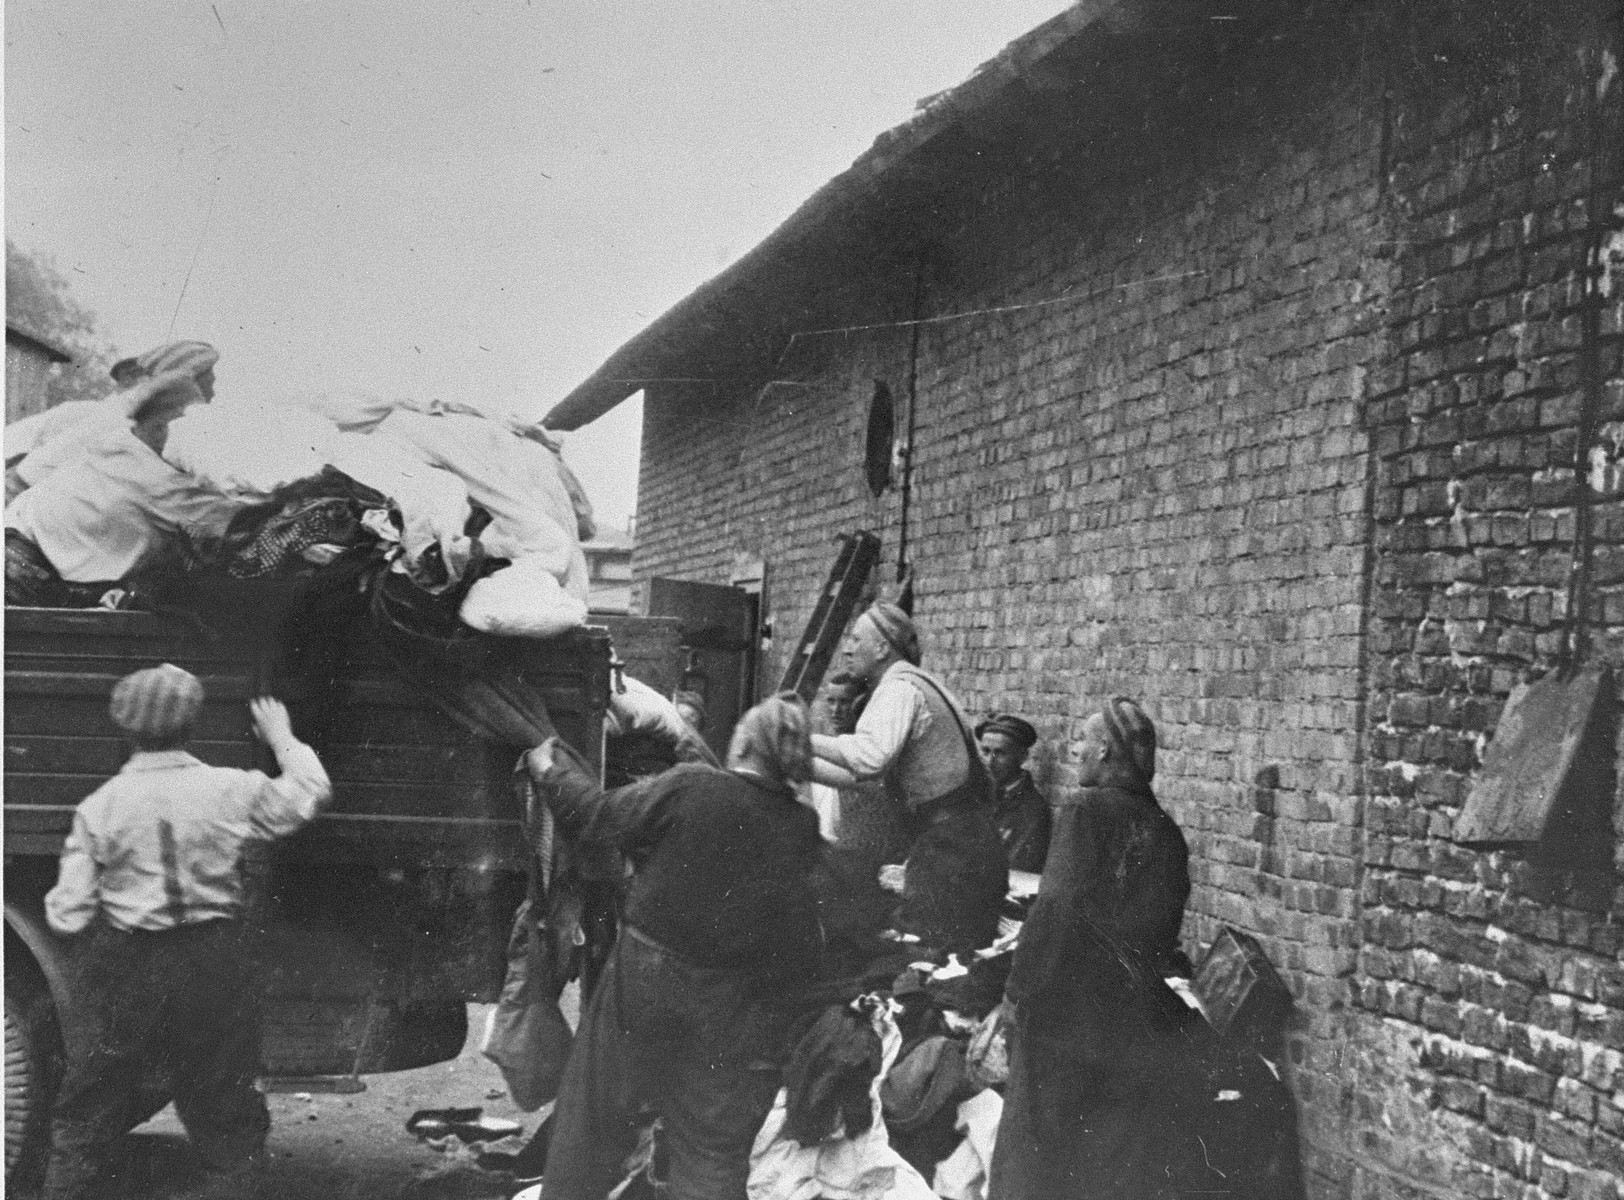 Prisoners in the Aufräumungskommando (order commandos) unload the confiscated property of a transport of Jews from Subcarpathian Rus at a warehouse in Auschwitz-Birkenau.

The camp prisoners came to refer to the looted property as "Kanada," associating it with the riches symbolized by Kanada.  The members of this commando were almost exclusively Jews.  "Kanada" storage facilities occupied several dozen barracks and other buildings around the camp.  The looted property was funneled from Auschwitz through an extensive distribution network that served many individuals and various economic branches of the Third Reich.

Standing from left to right are Simon Bobker, Alexander Wertheimer. Chaim Laufer and Miso Vogel.